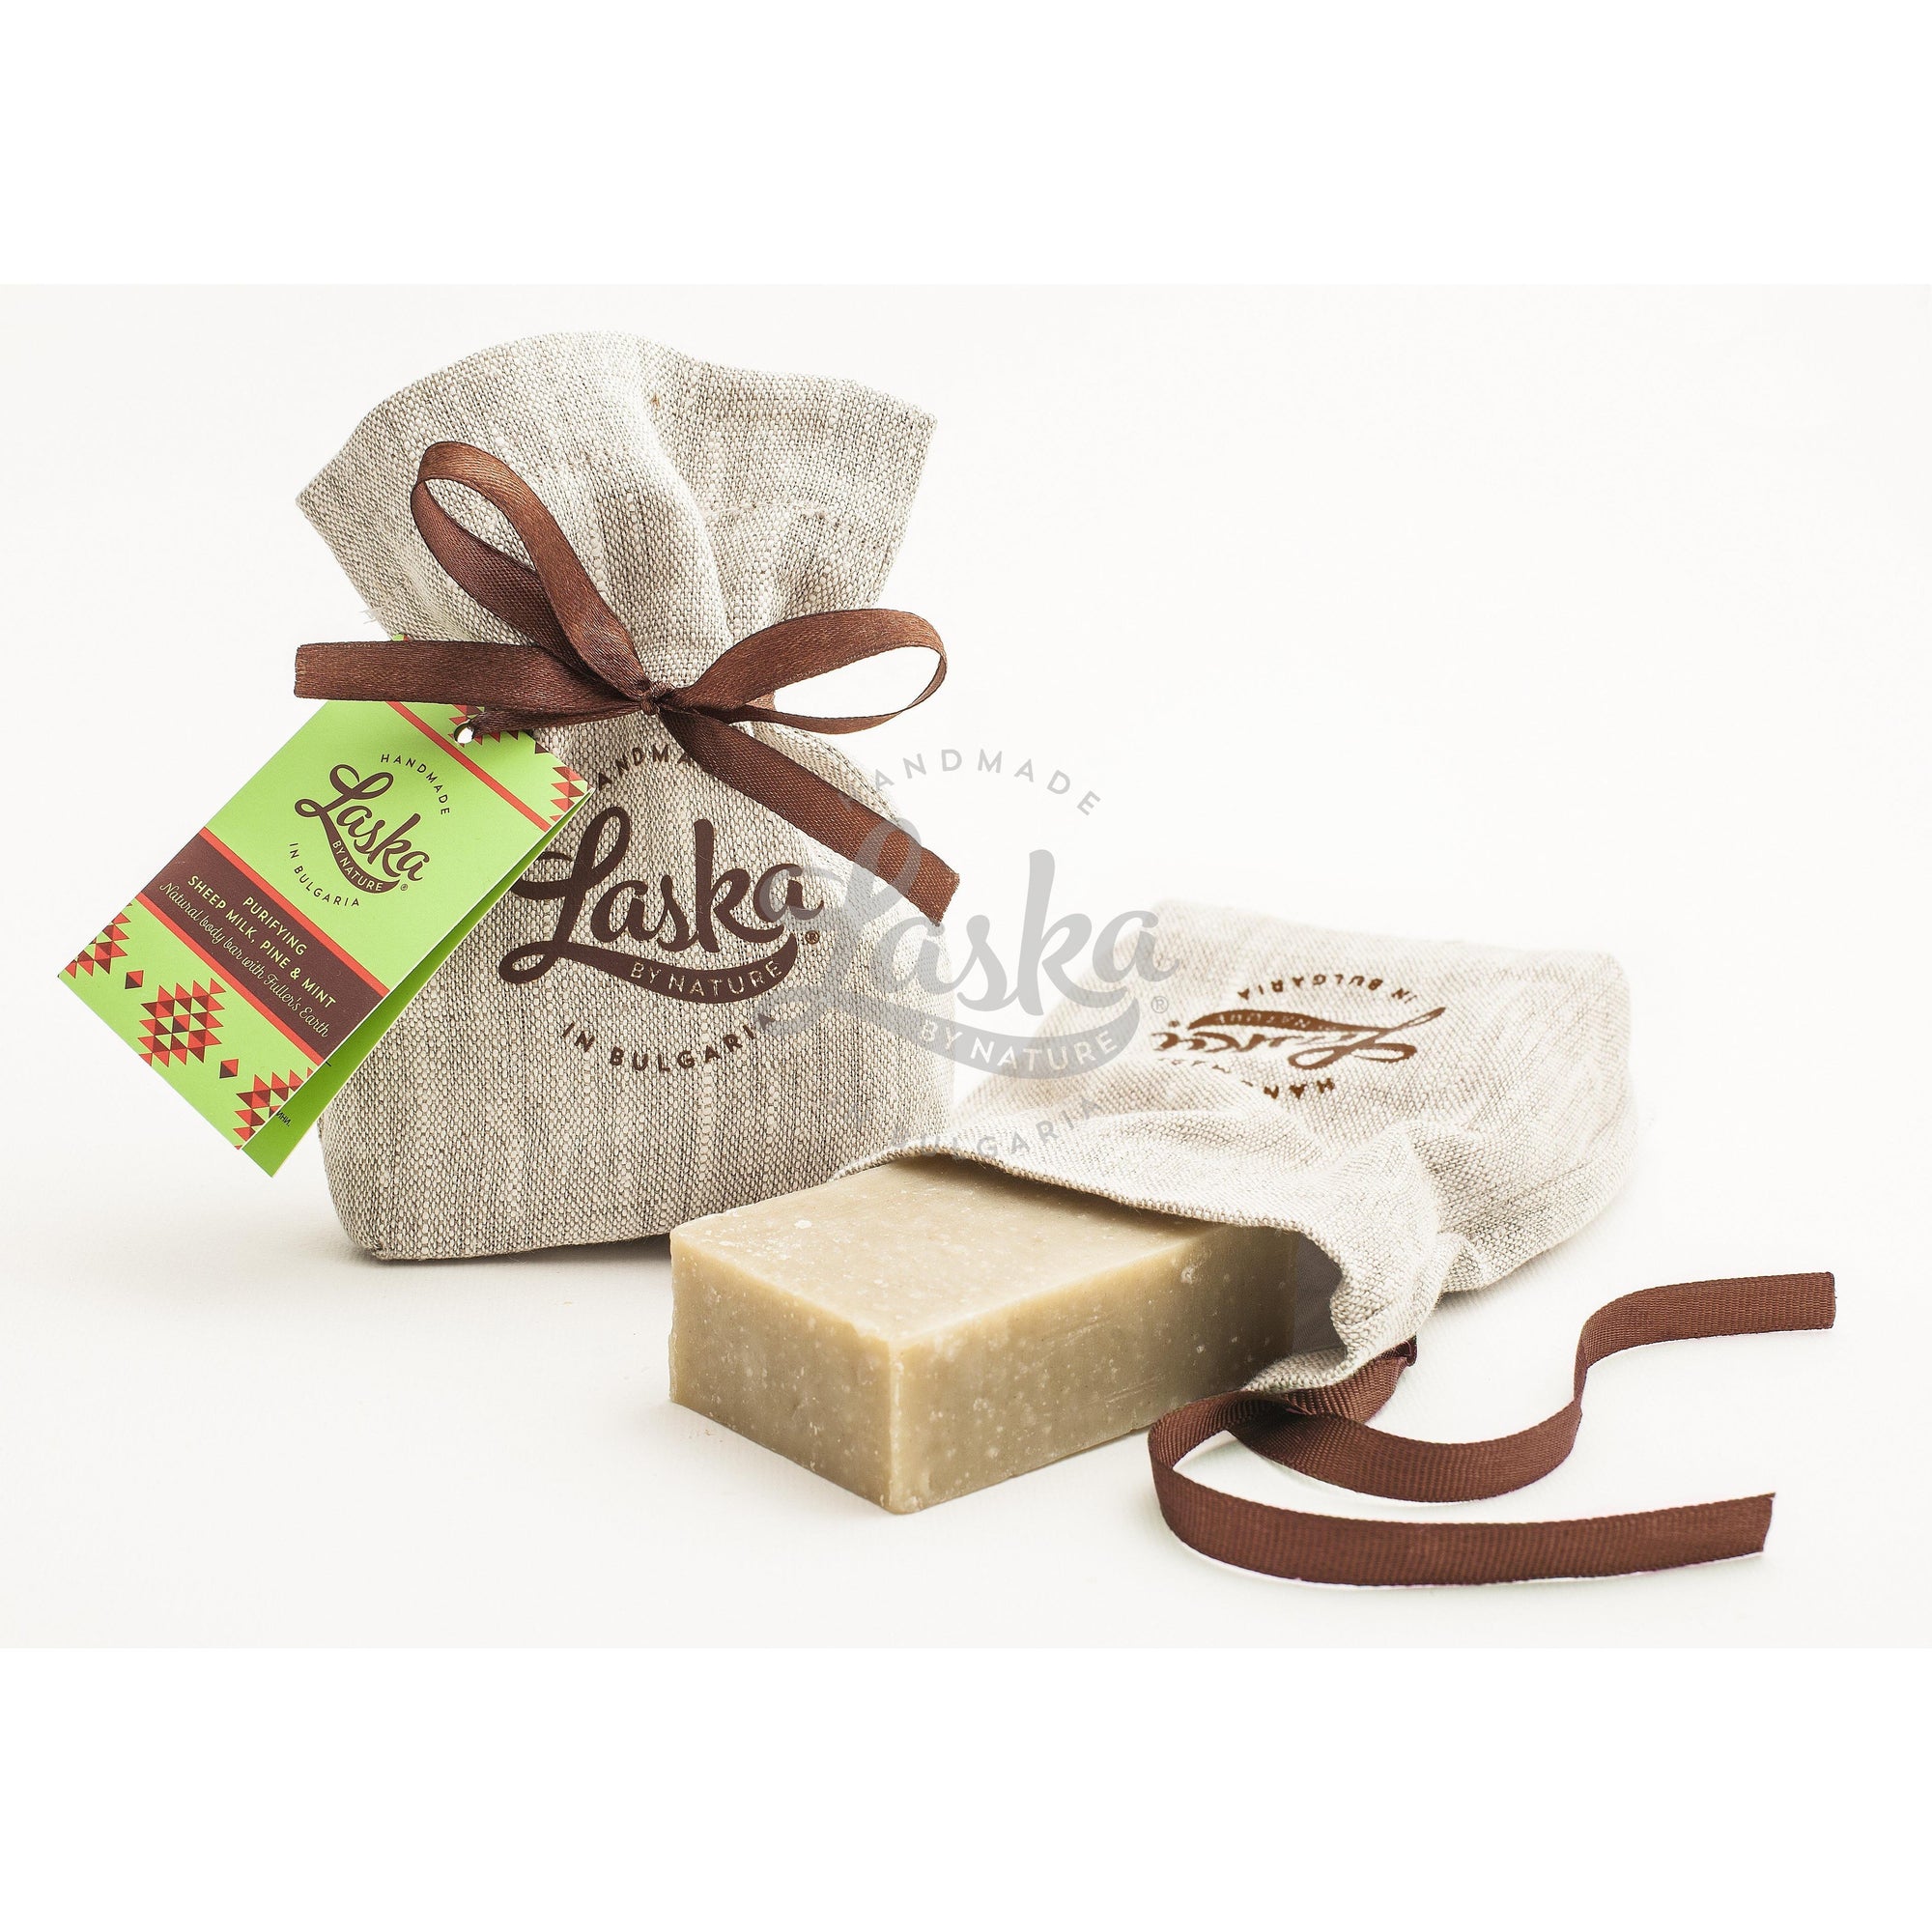 The travel pouch: Bulgarian sheep milk, pine & mint natural soap with Fuller's Earth-Natural soap-Laska by nature